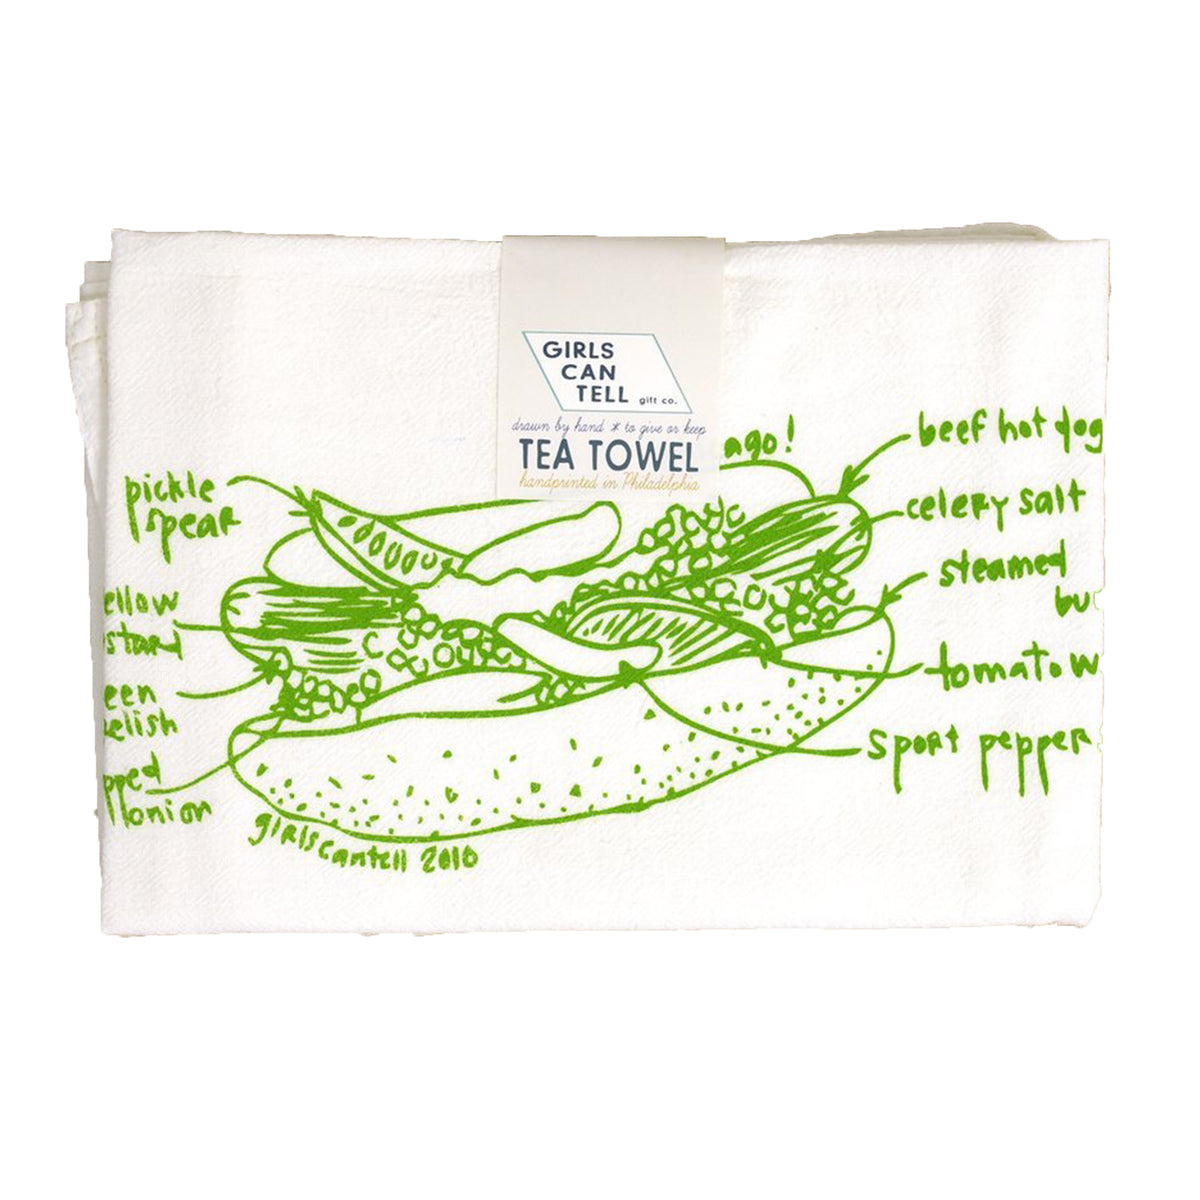 Chicago Hot Dog Tea Towel - All She Wrote